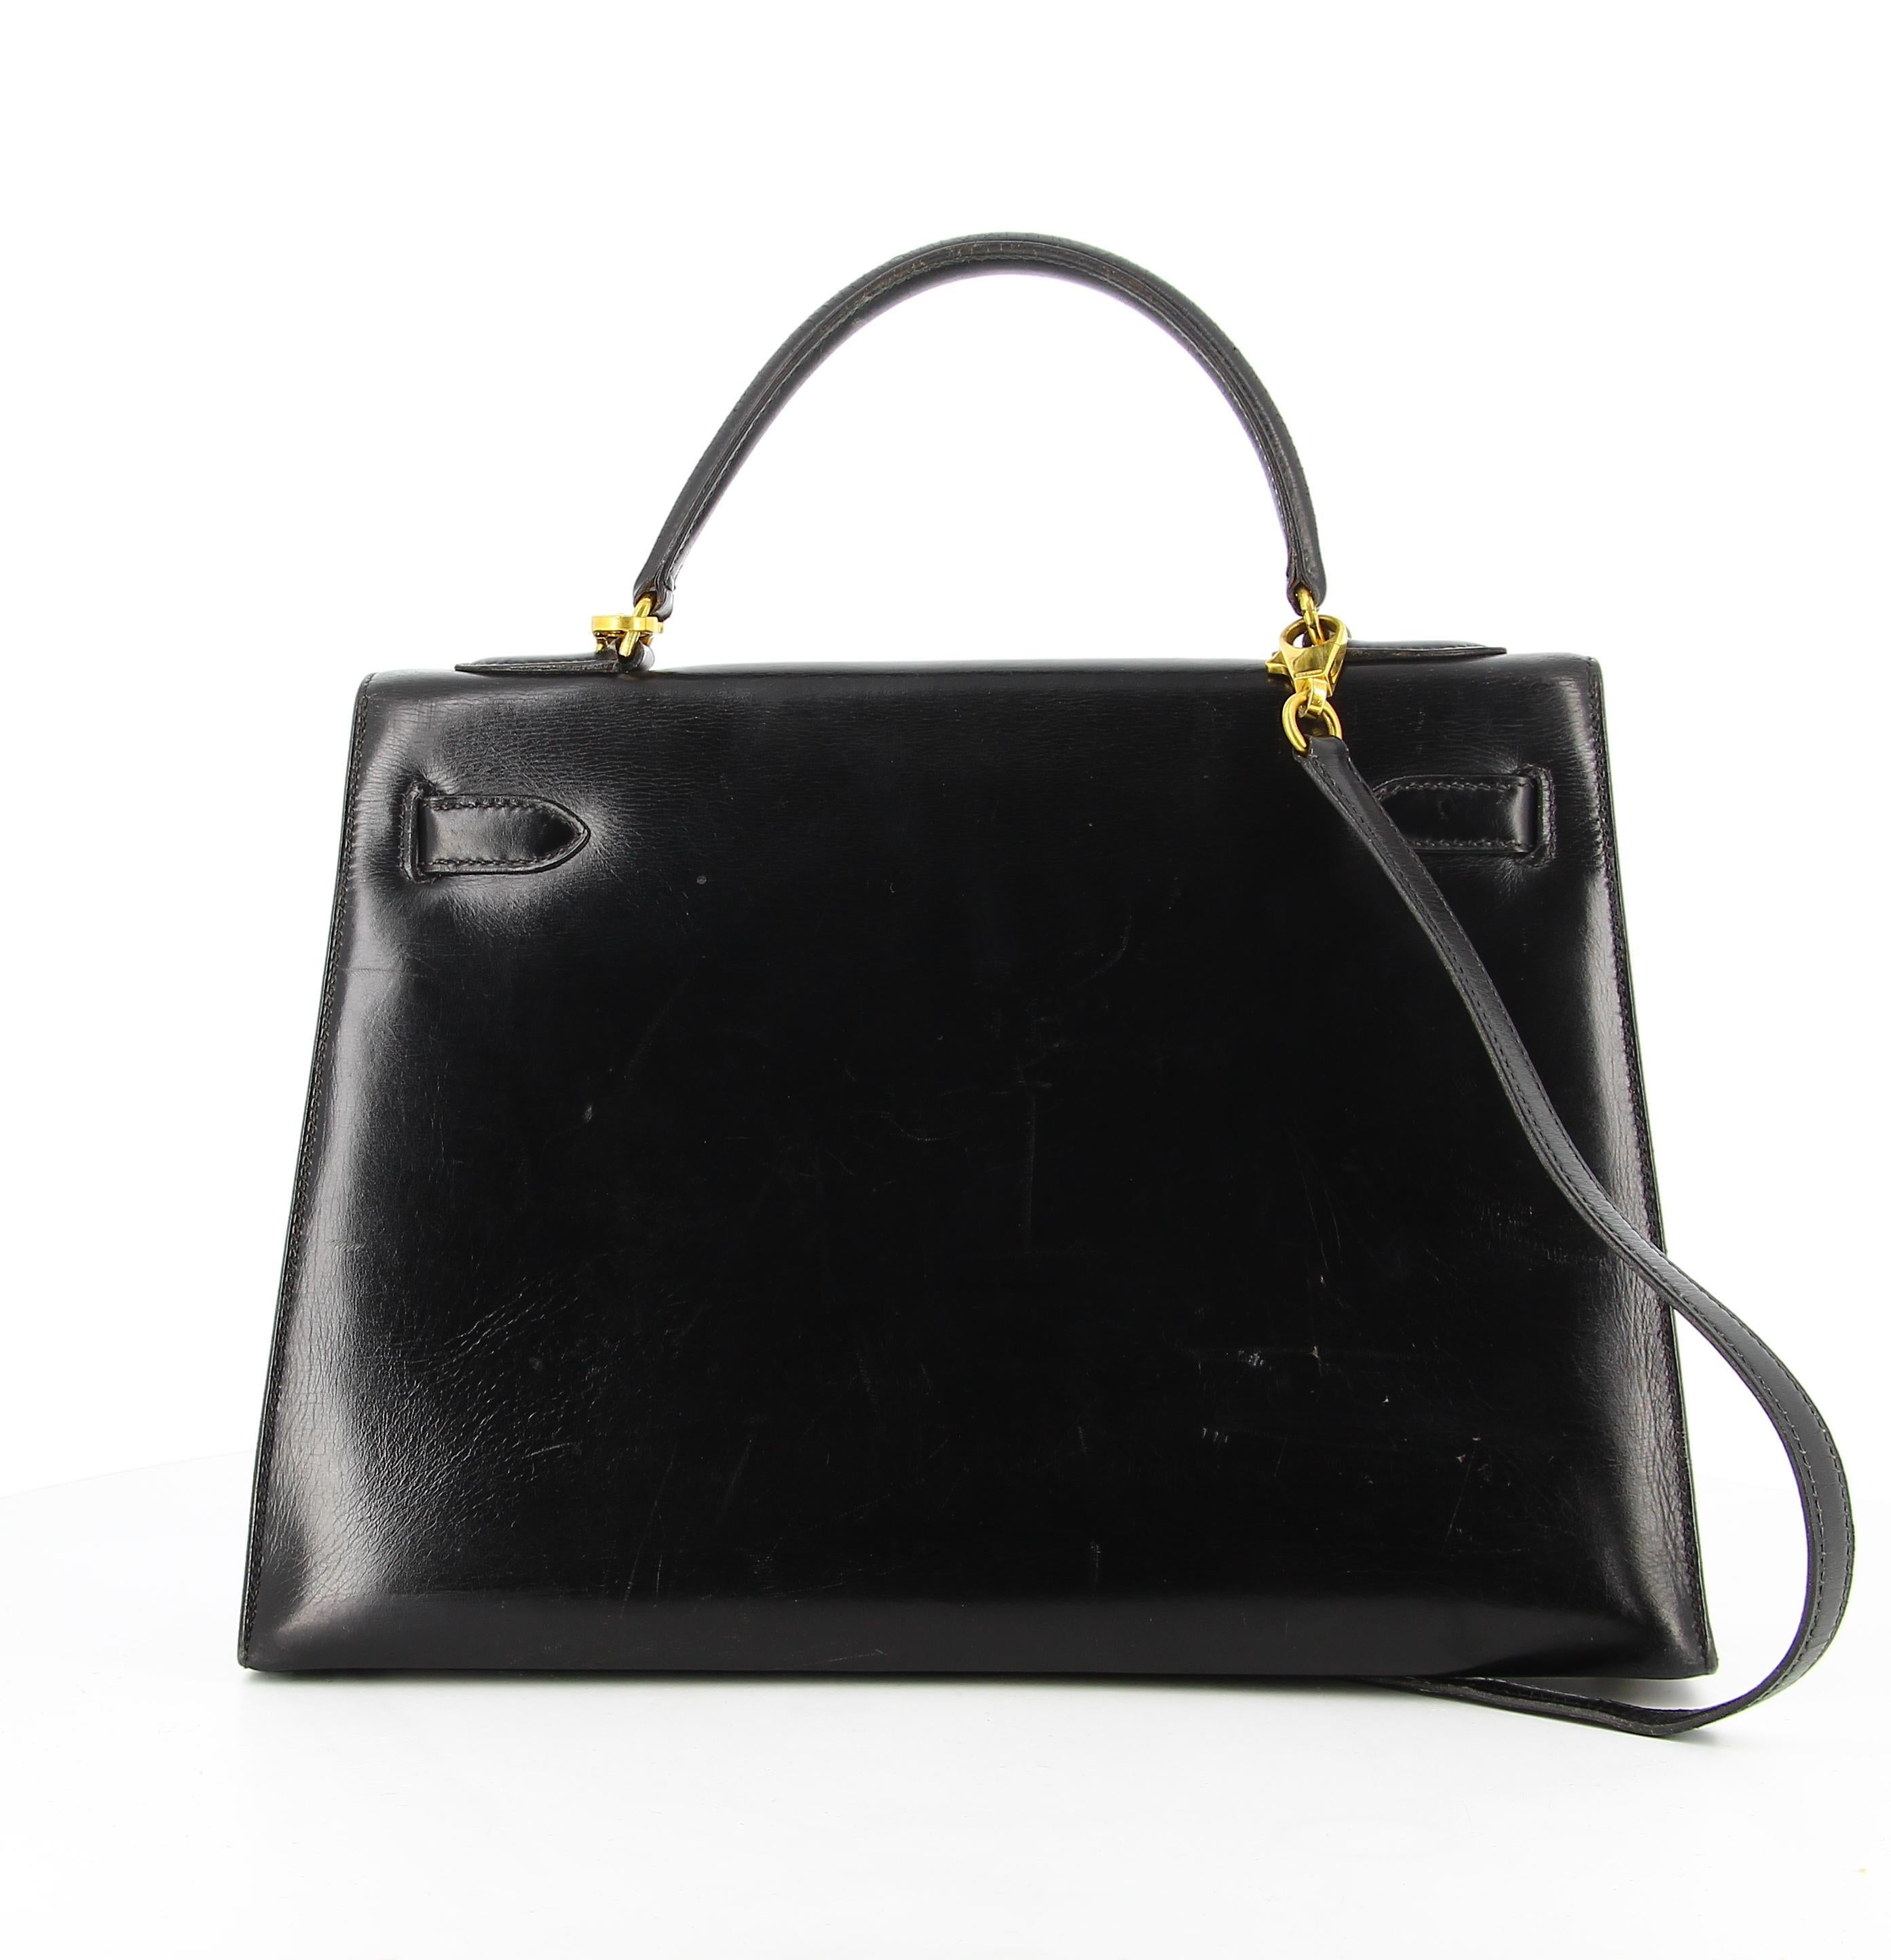 1970's Hermes Kelly Bag in Black Box Leather
Good condition, has slight traces of wear appeared with time (scratches, light cracking in the handle, clochette is missing)
This Hermes Kelly bag, smooth black leather, light cracks in the handles and